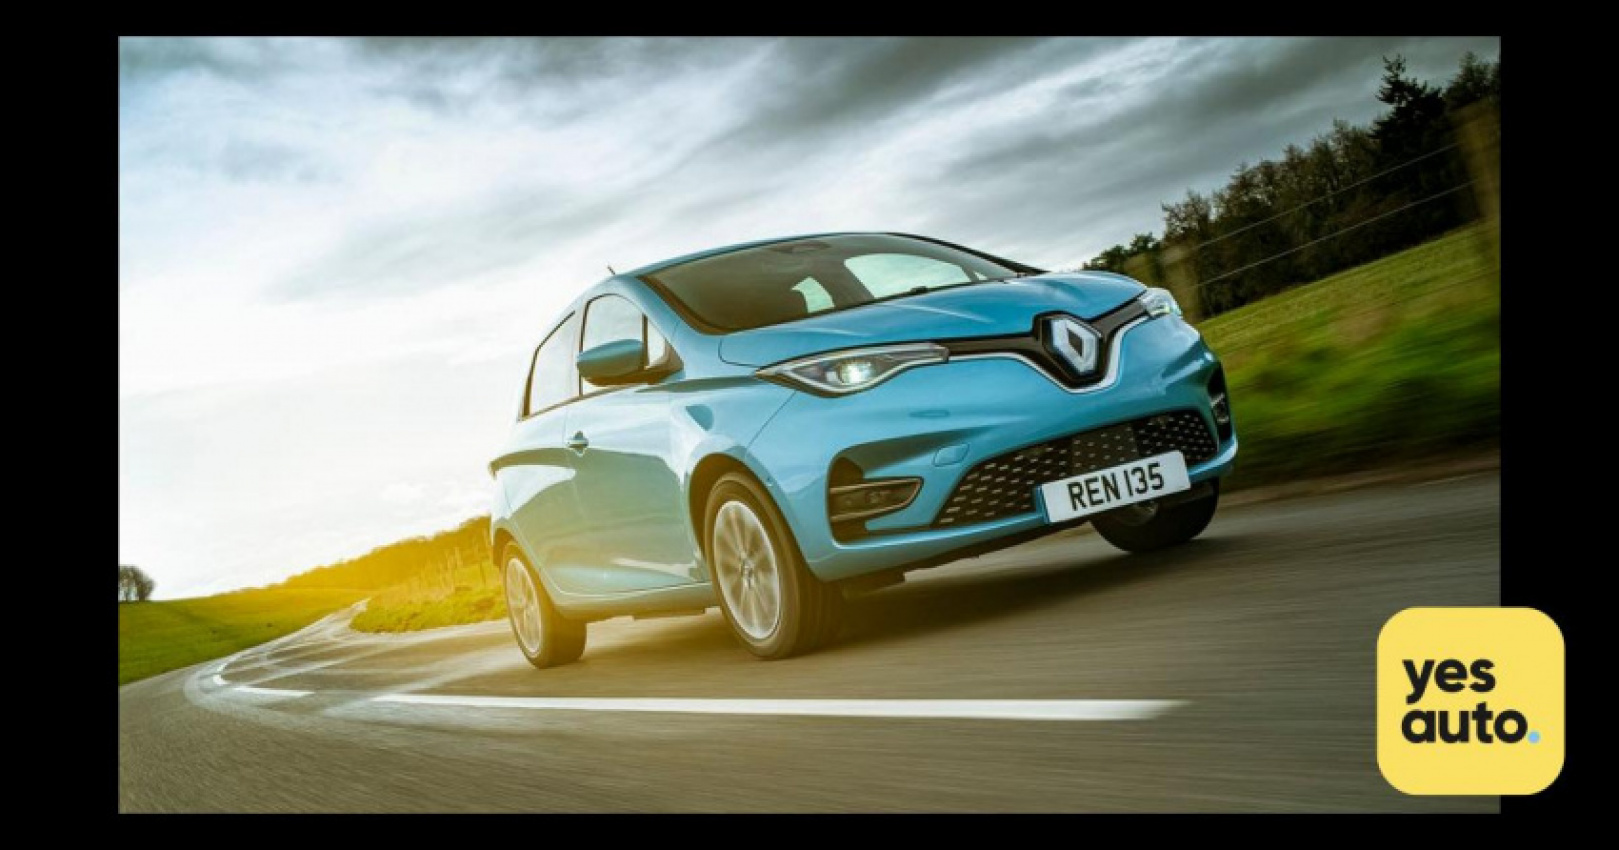 autos, cars, renault, car news, eco-friendly, electric vehicle, review, renault zoe takes the crown as europe’s best-selling ev